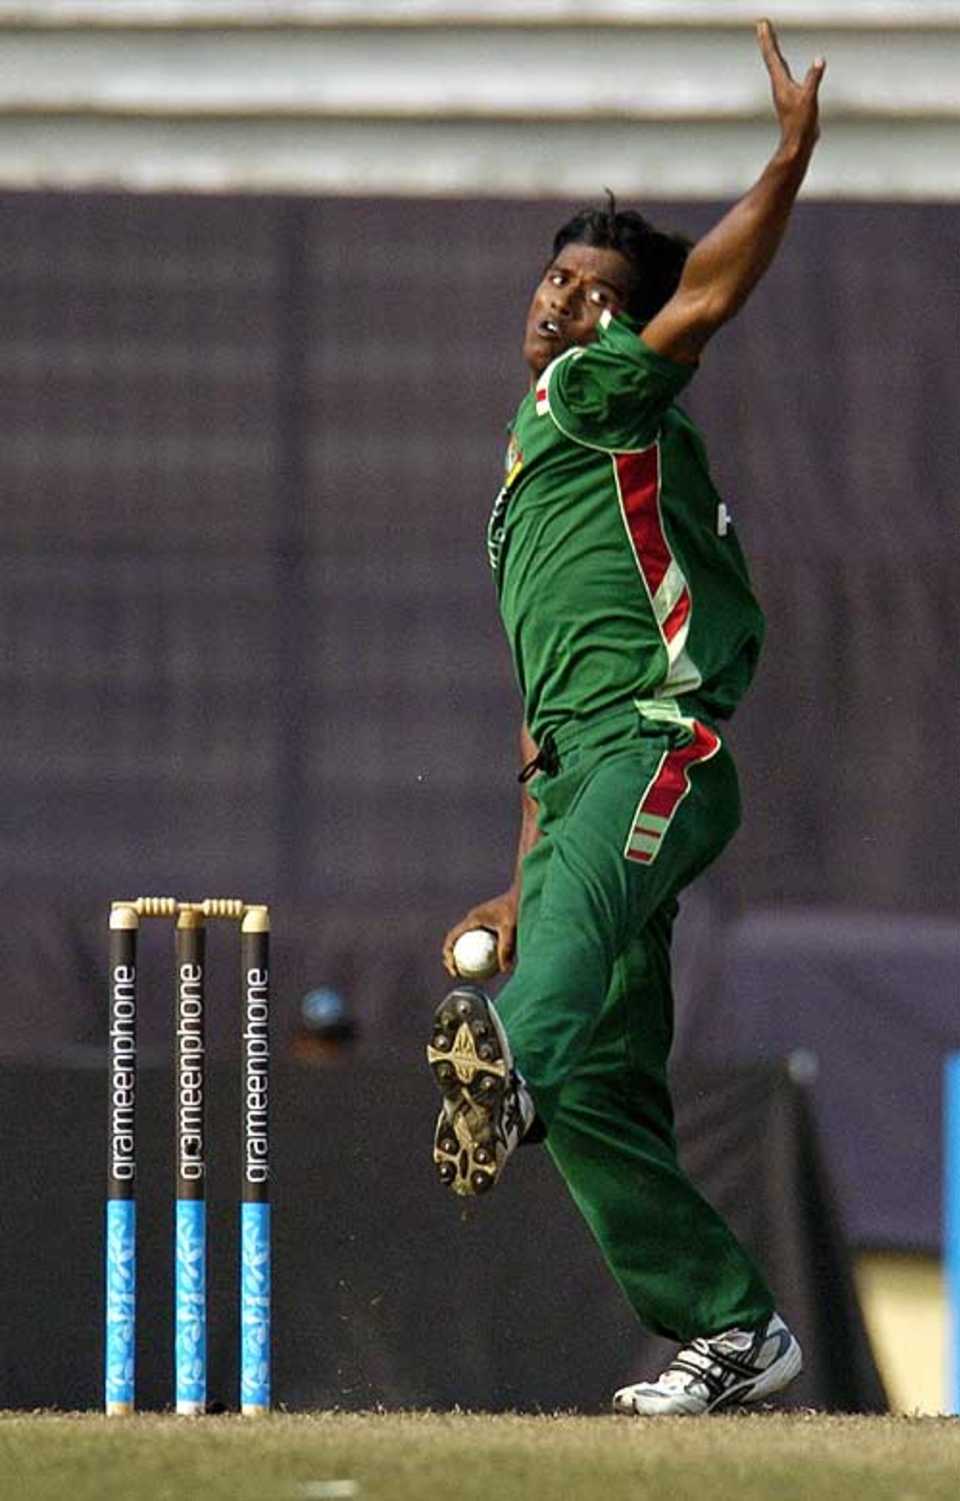 Rubel Hossain bowls in the final